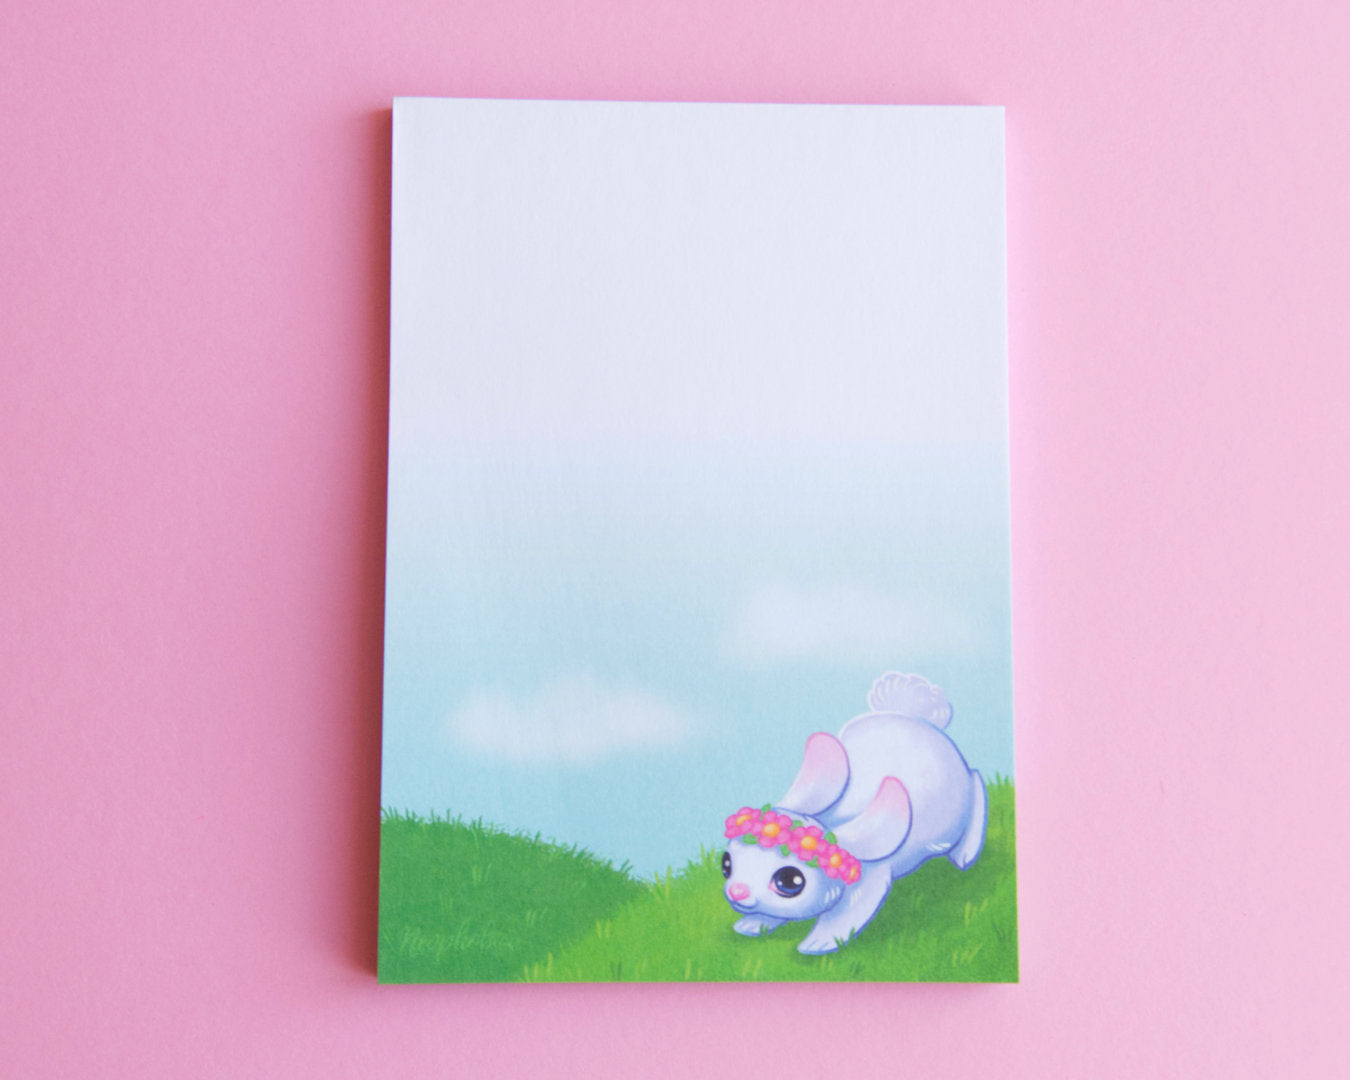 Flower Bunny - Note Pad